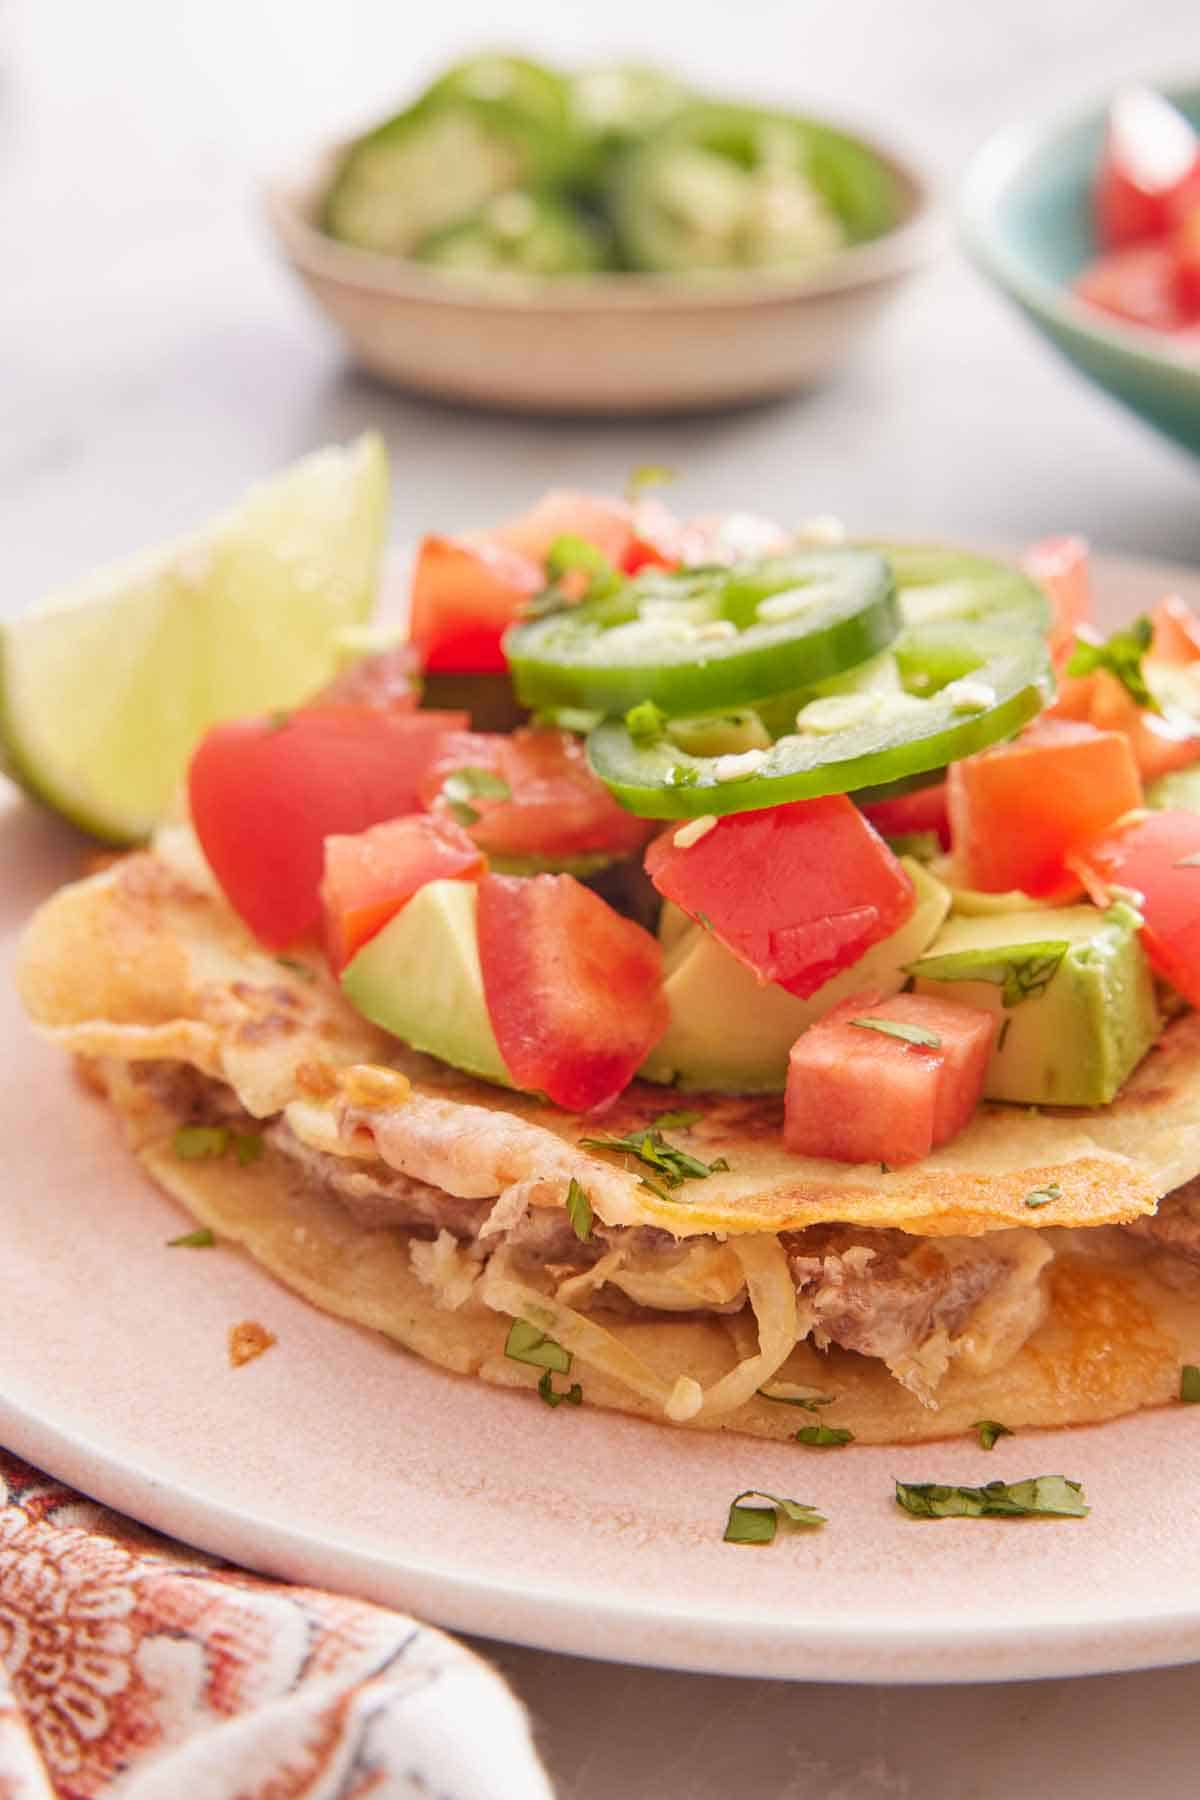 A close profile view of a plate with mulitas topped with diced tomatoes, avocados, and jalapenos with a lime beside it.